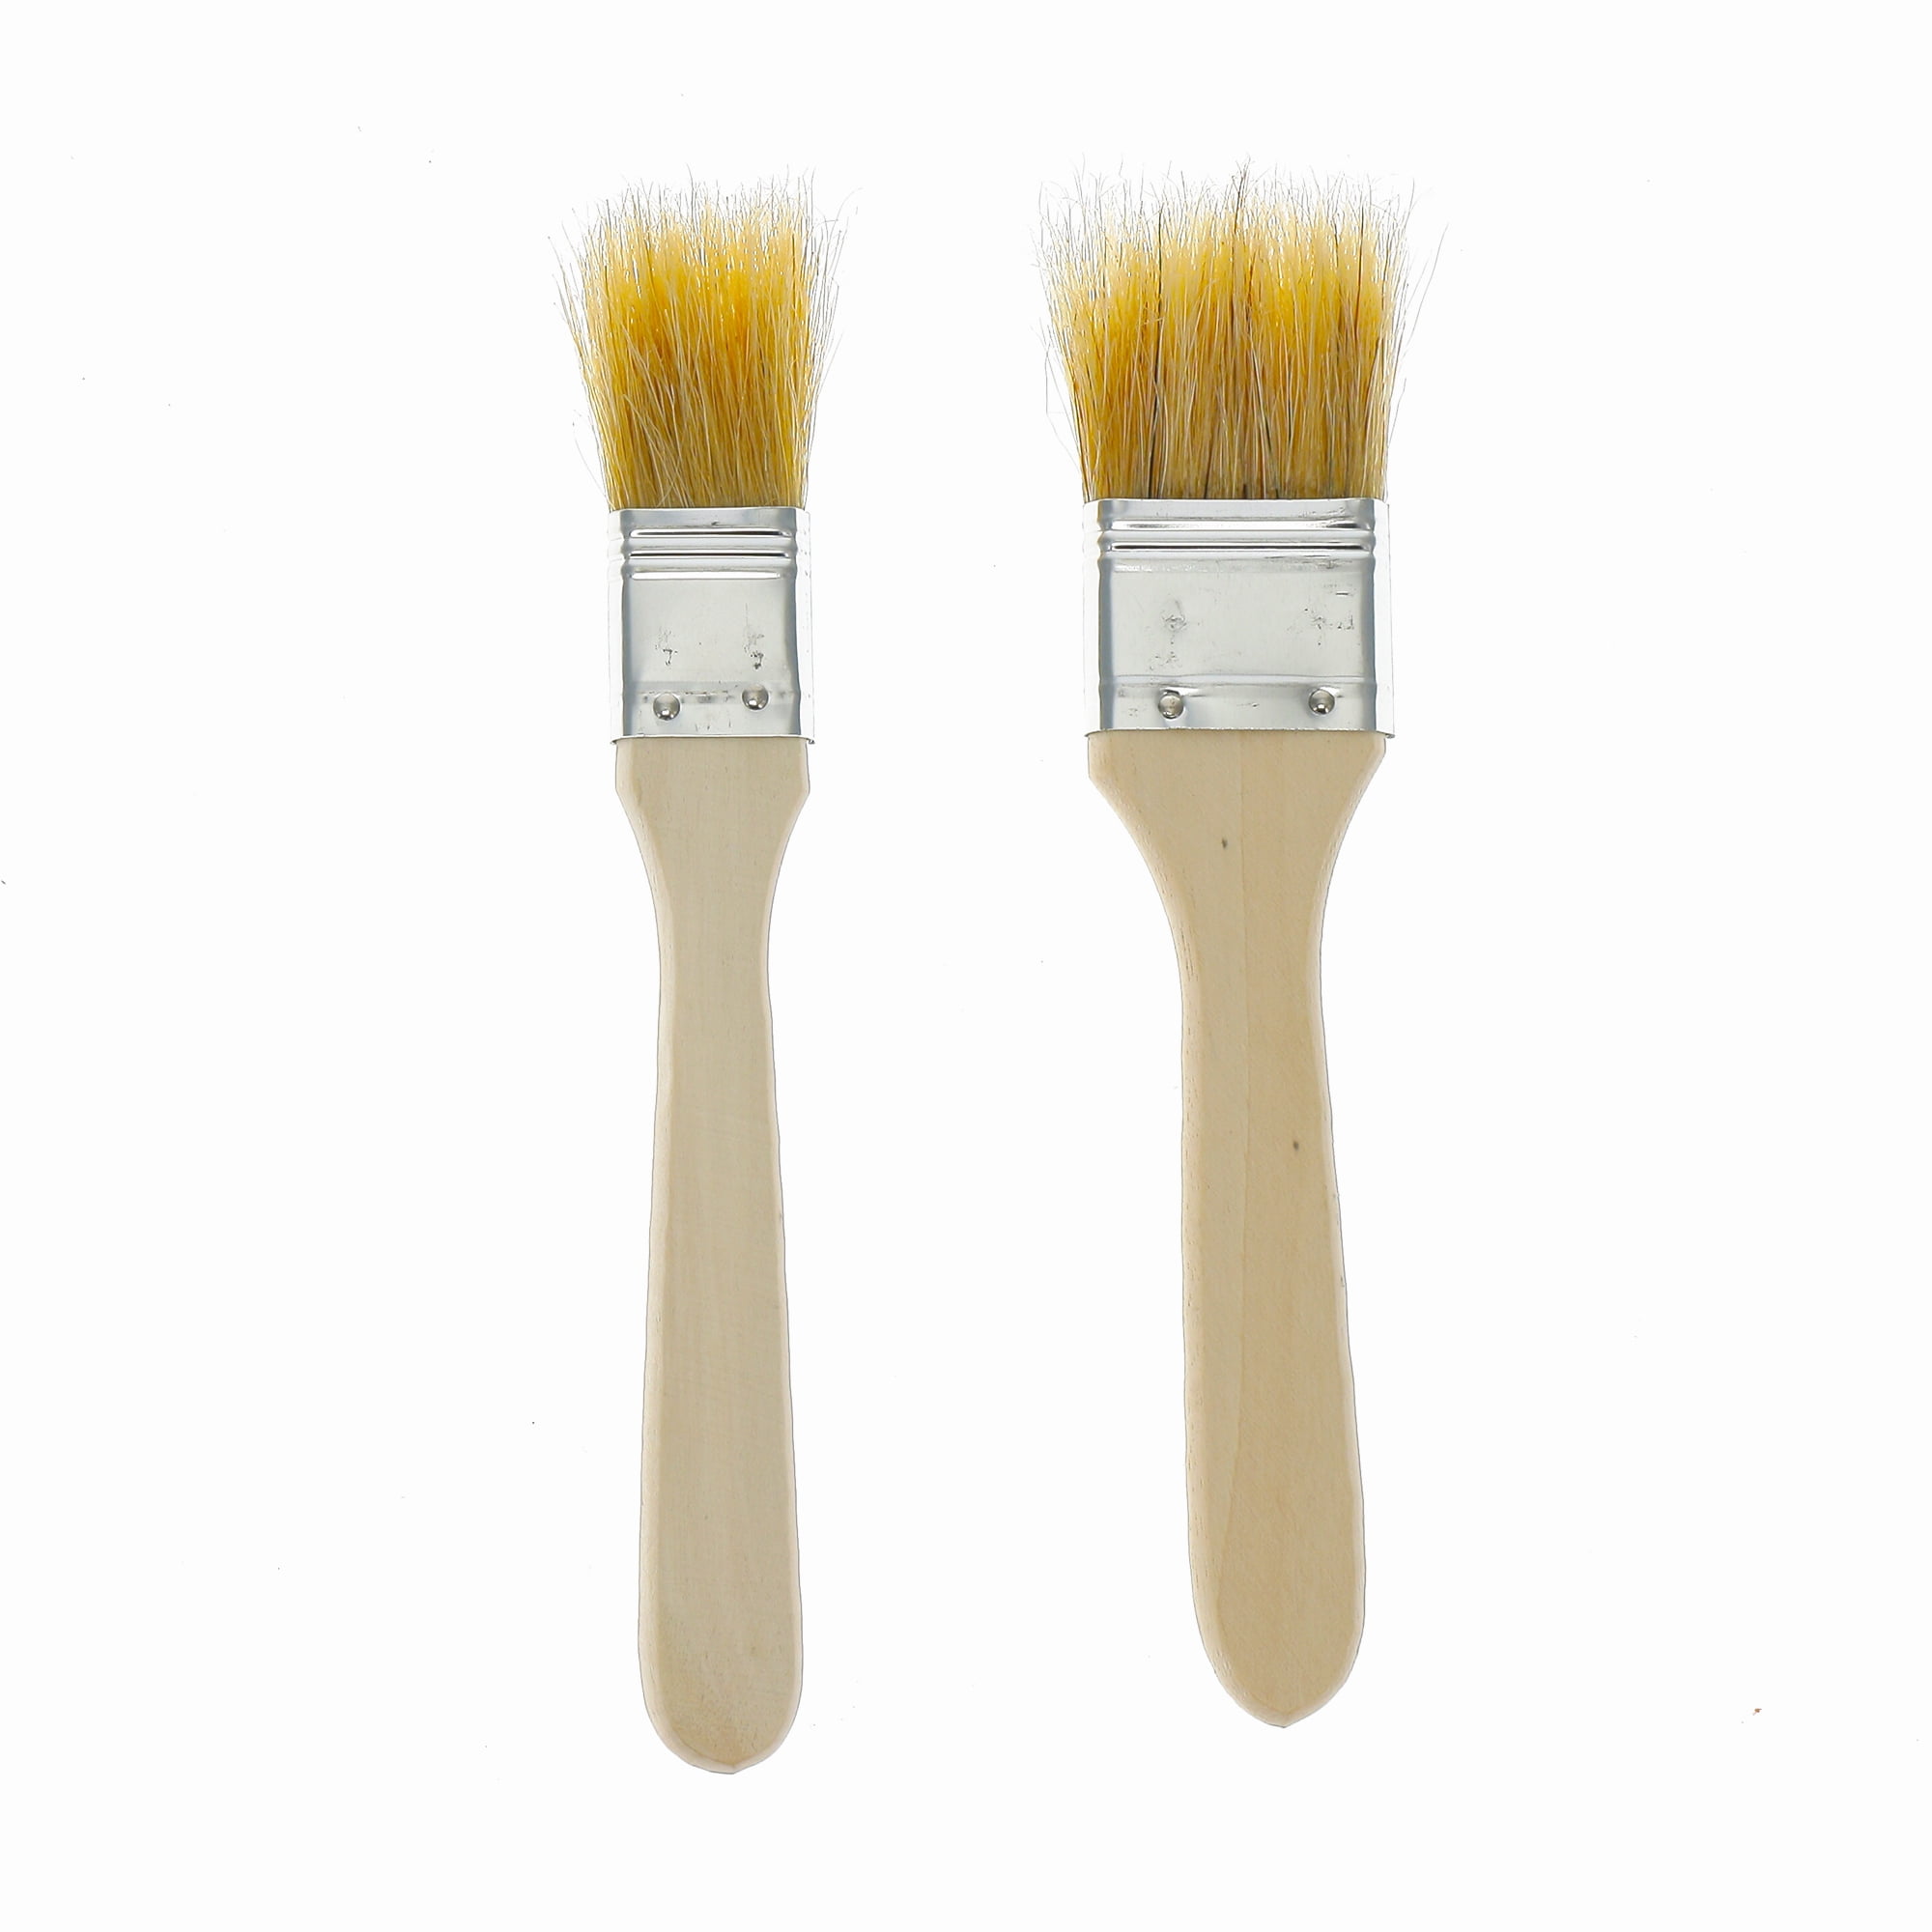 Mainstays 2-Piece 1" and 1.5" Wide Wooden Pastry Brush Set with Natural Bristles, Brown